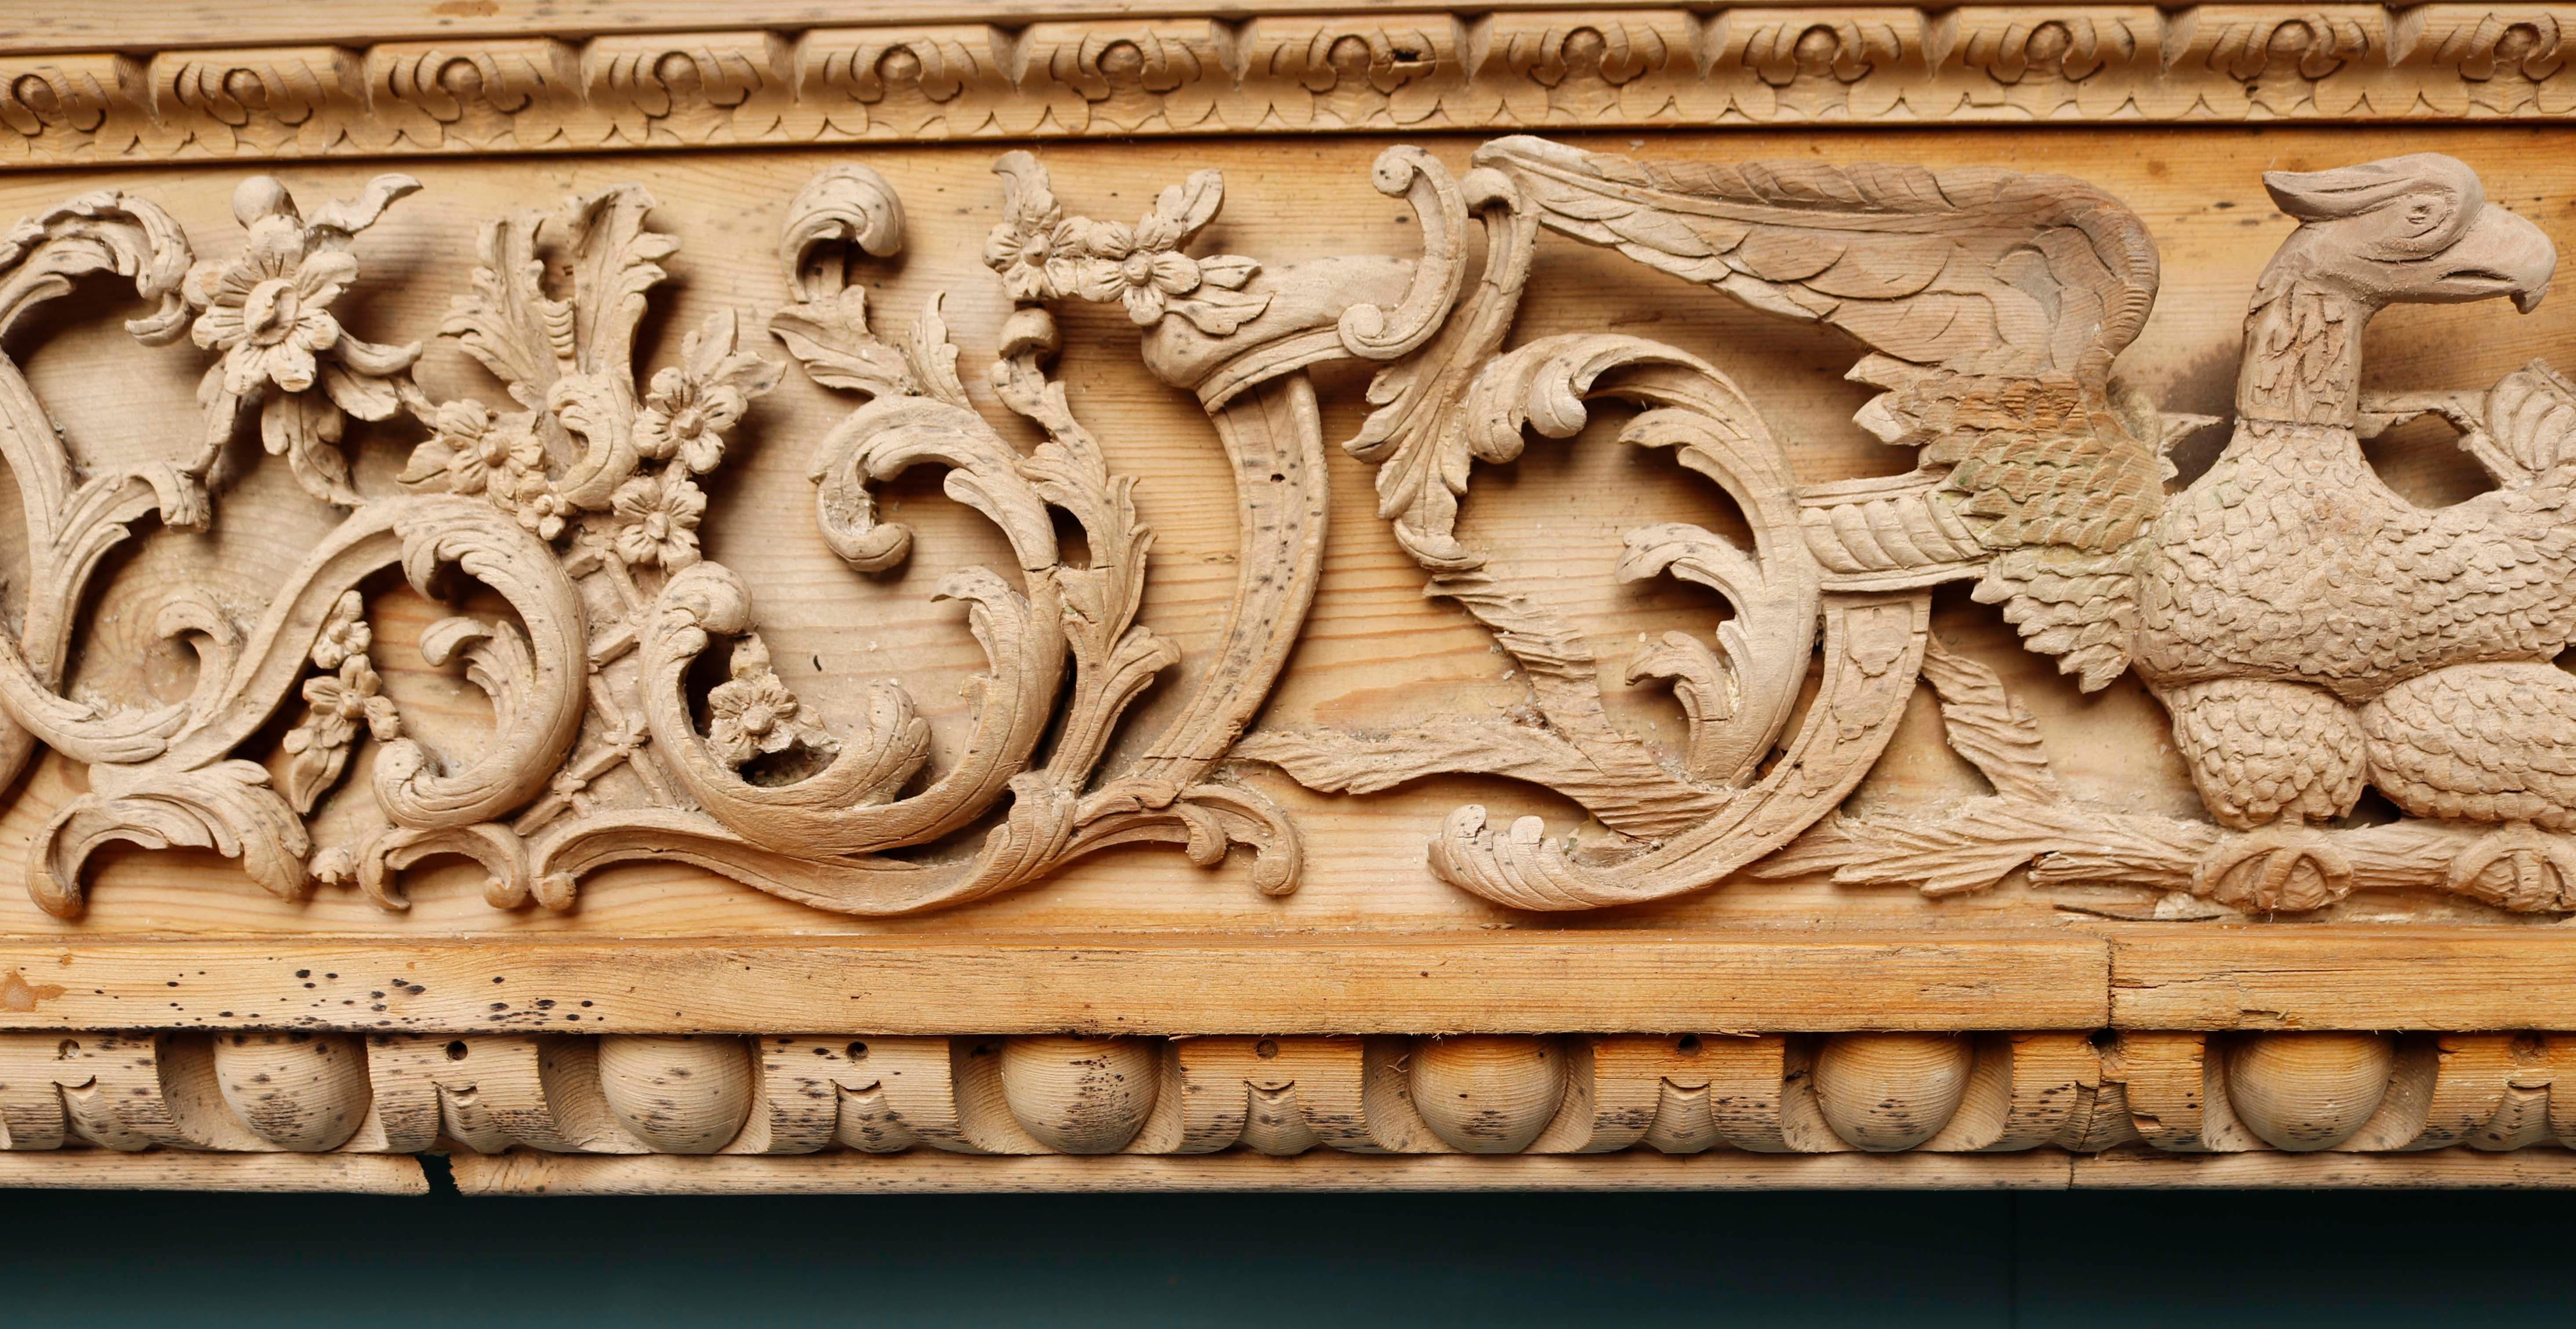 Antique Georgian Period Carved Fireplace. A rare English George III period carved pine fireplace. The frieze is deeply carved with foliage and centred with an eagle.

Additional dimensions

Opening height 119 cm

Opening width 121 cm

Width